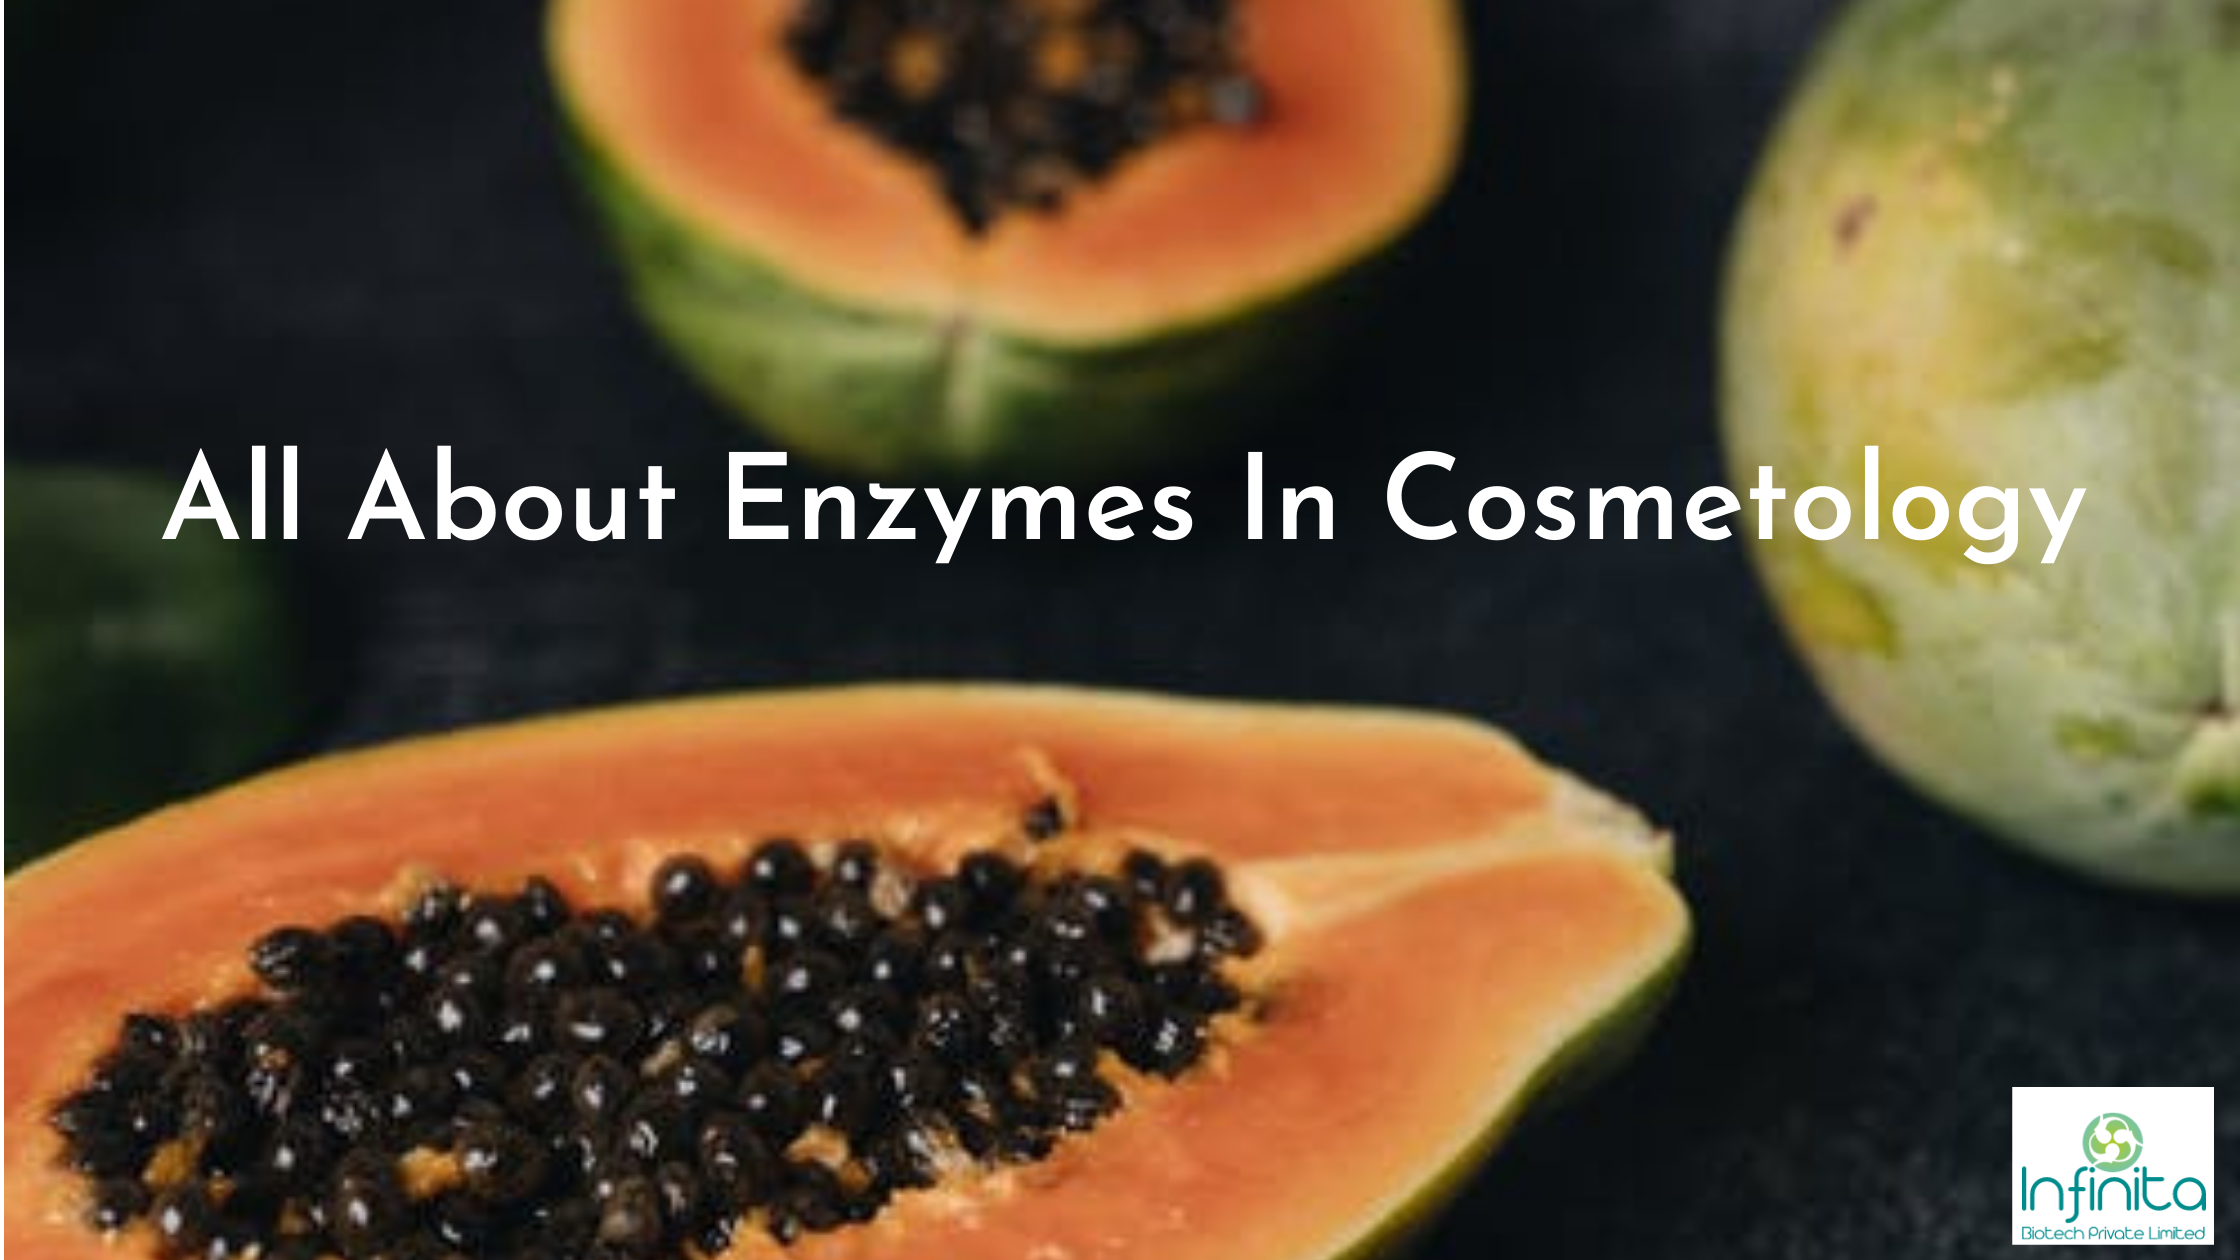 Everything you need to know about enzymes in cosmetology